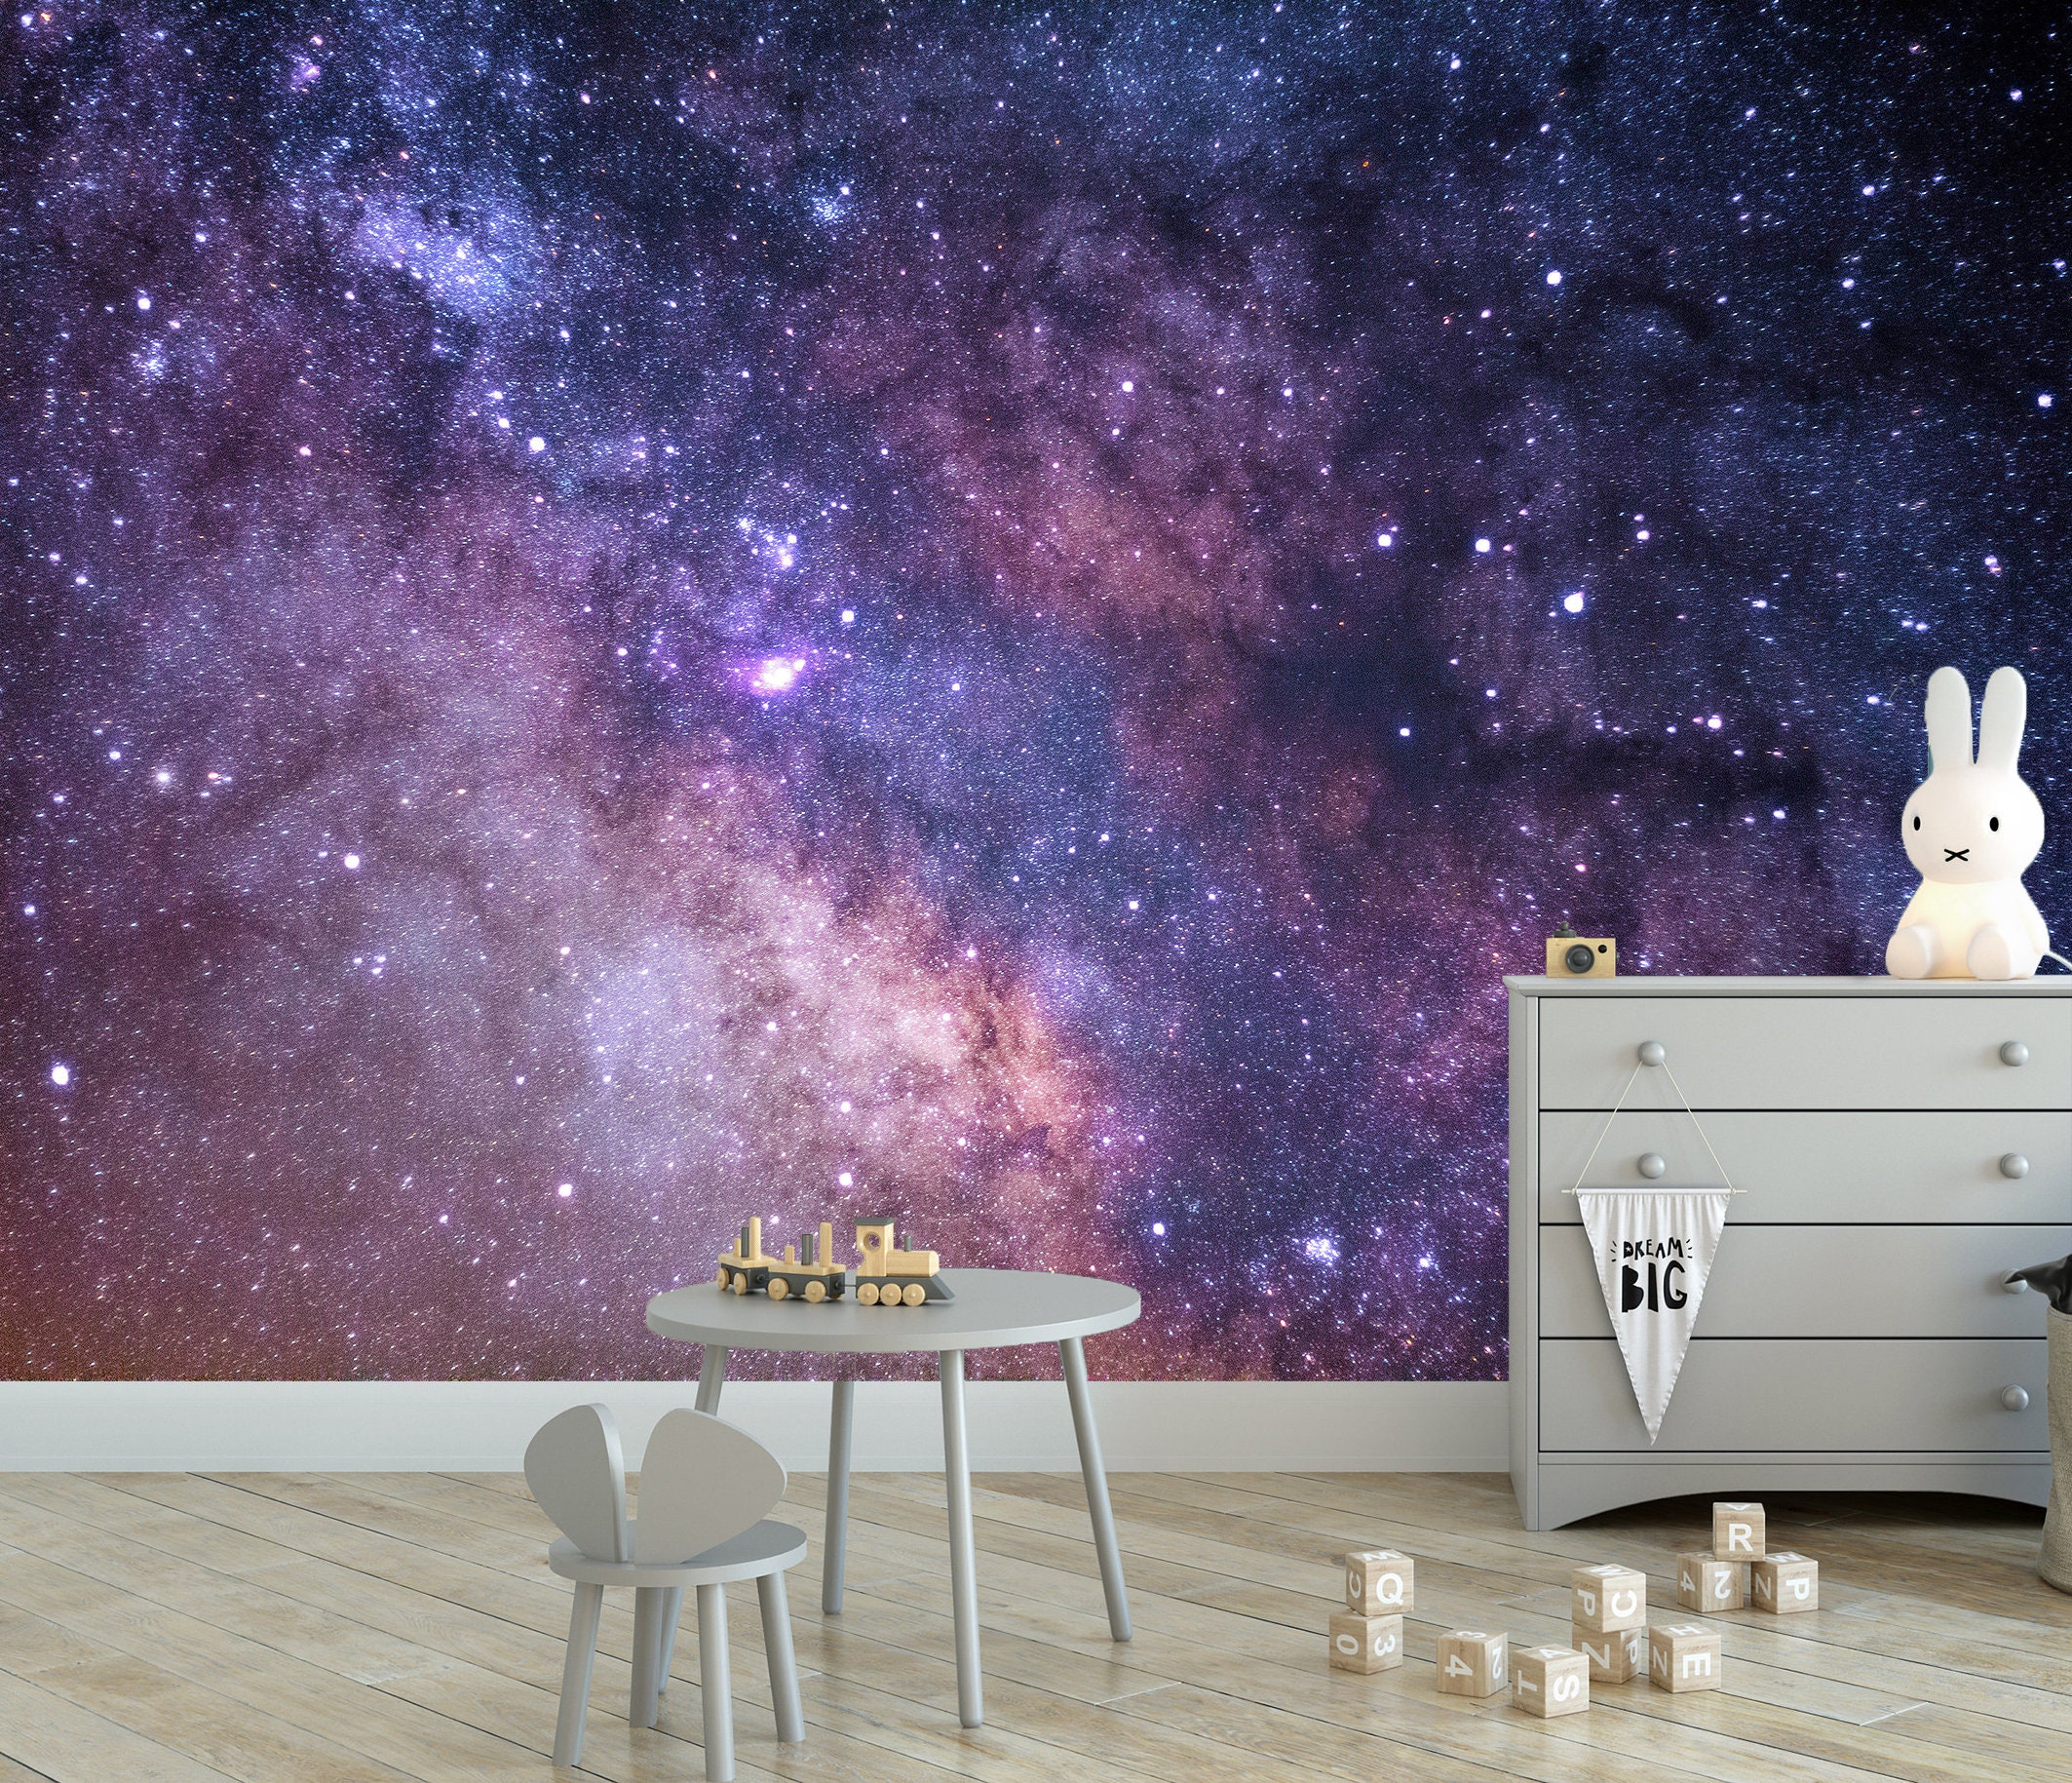 Mural View Wallpaper Sweden Peel Night Sky - Wallpaper Sky Decor Starry Star Clusters Wall Wall Stick and Etsy Space Galaxy